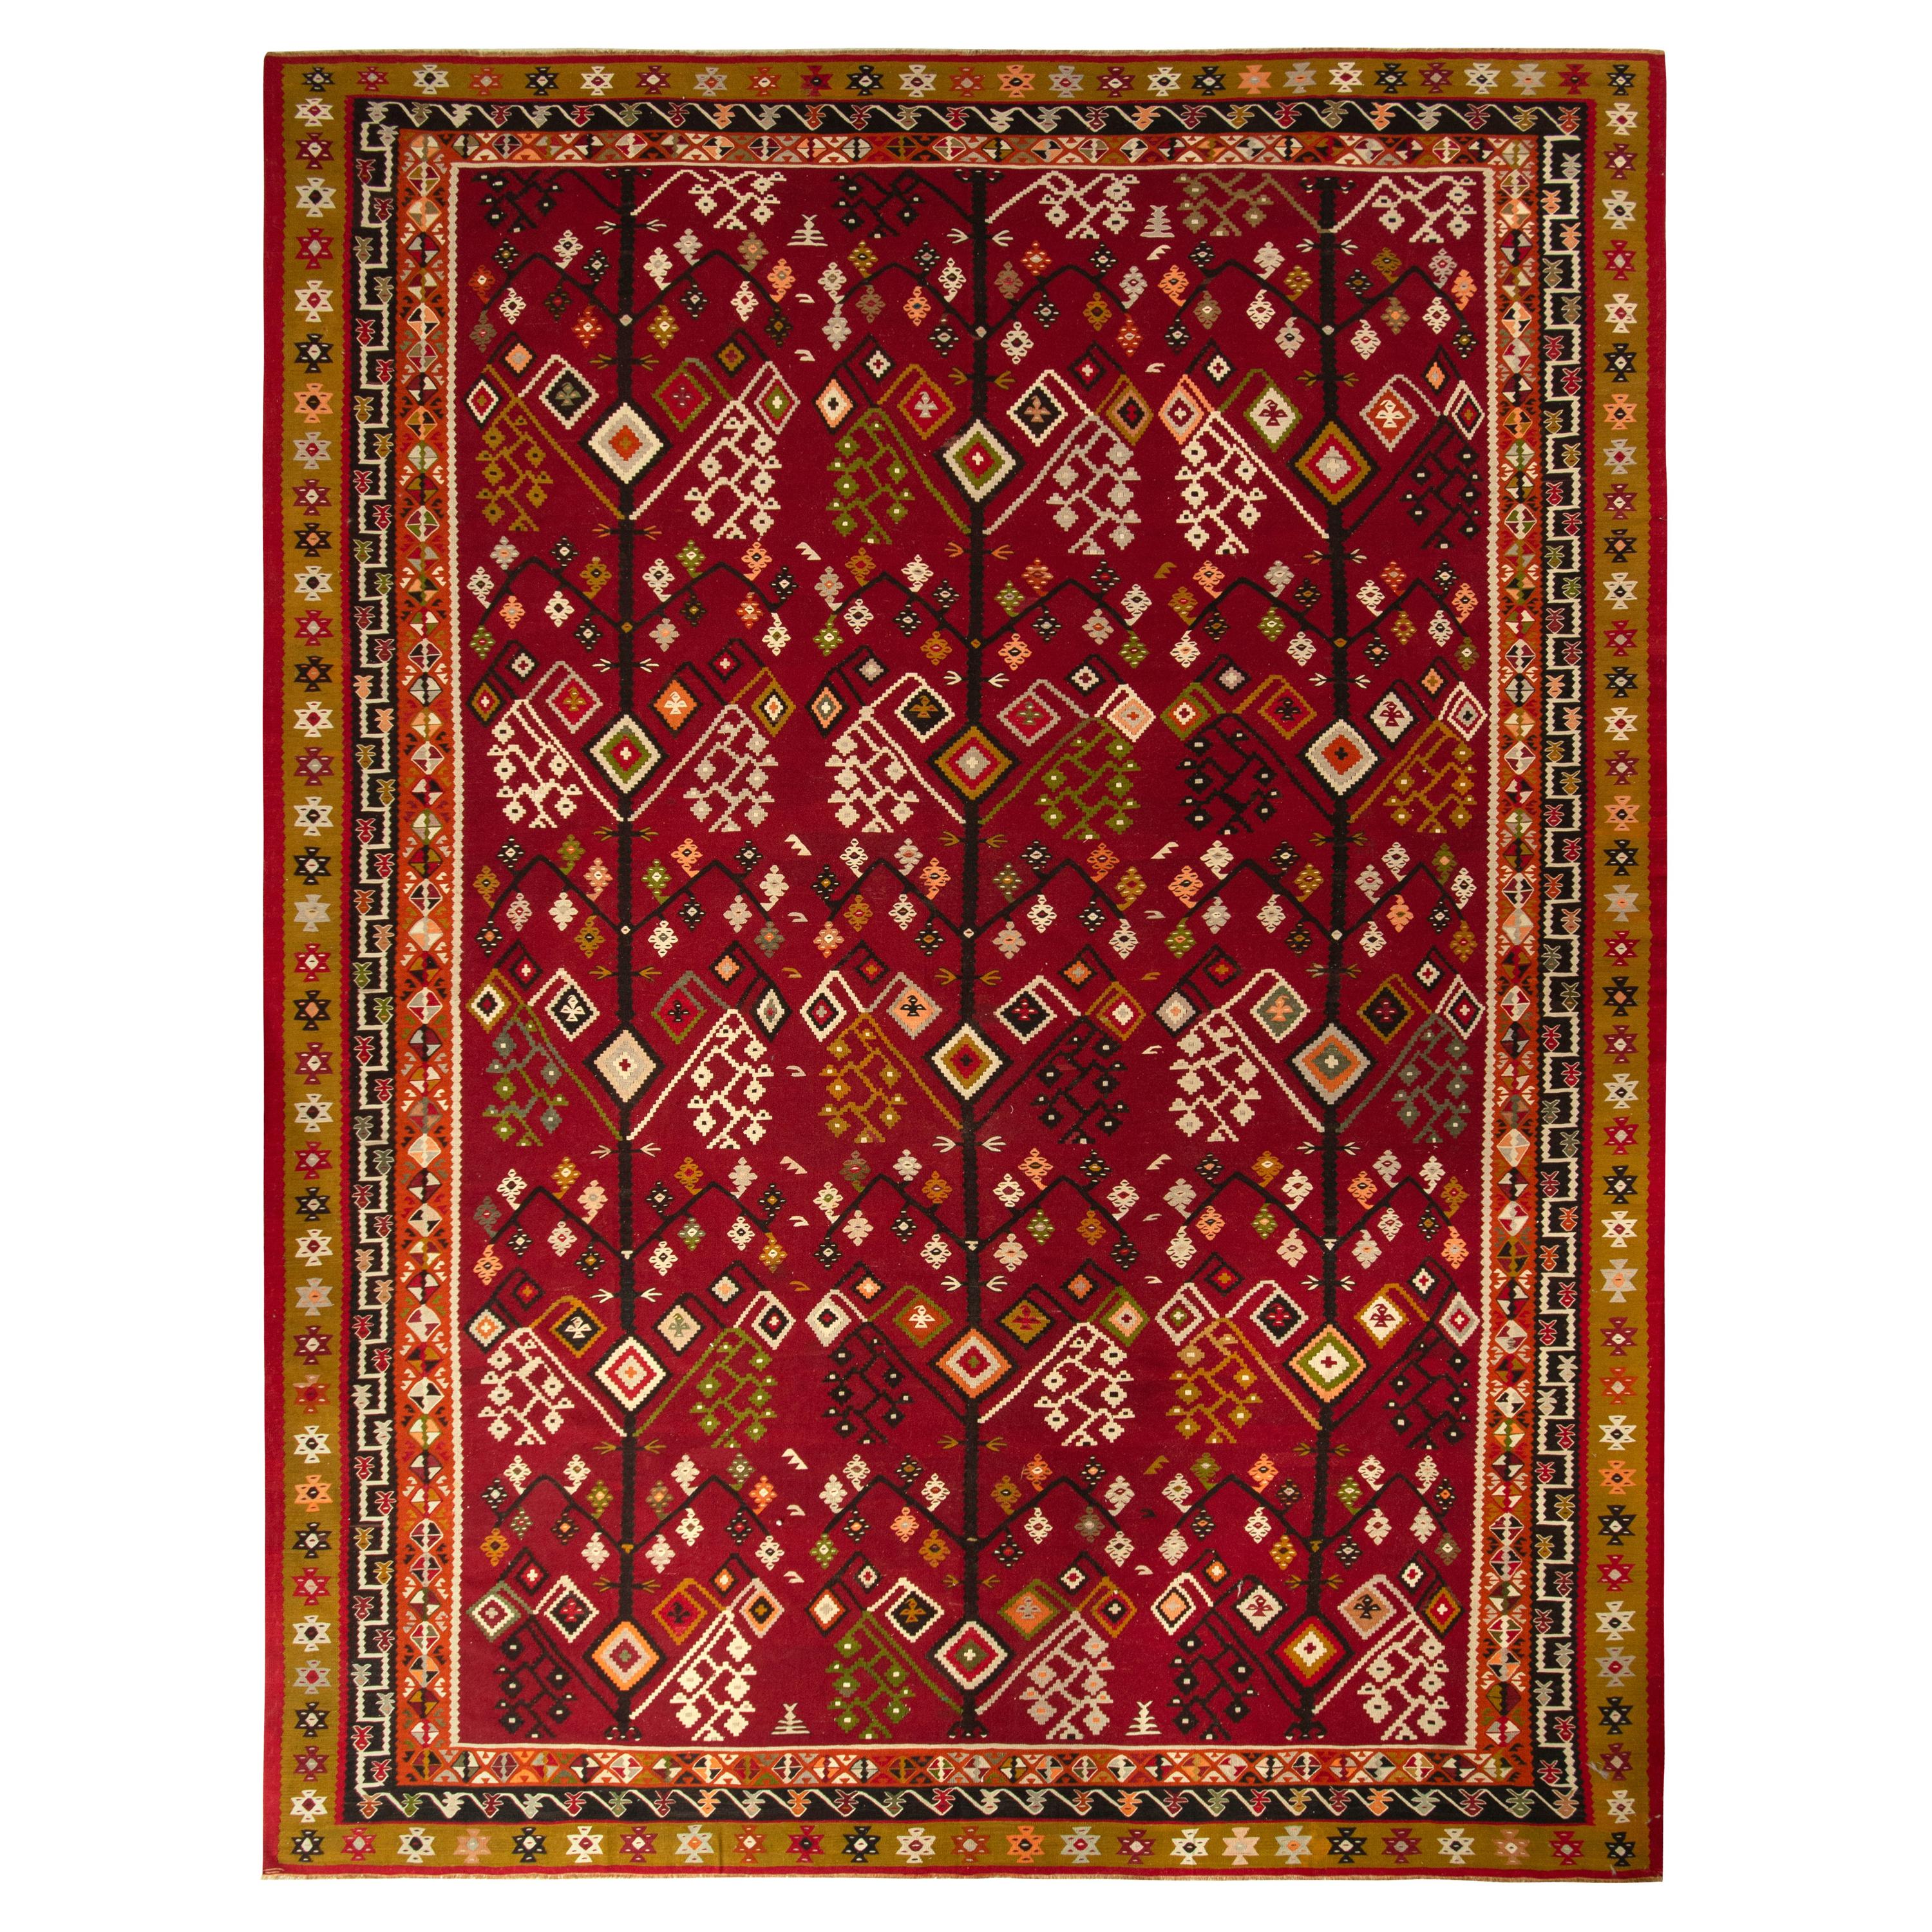 Handwoven Vintage Kilim Rug in Red and Gold Geometric Pattern by Rug & Kilim